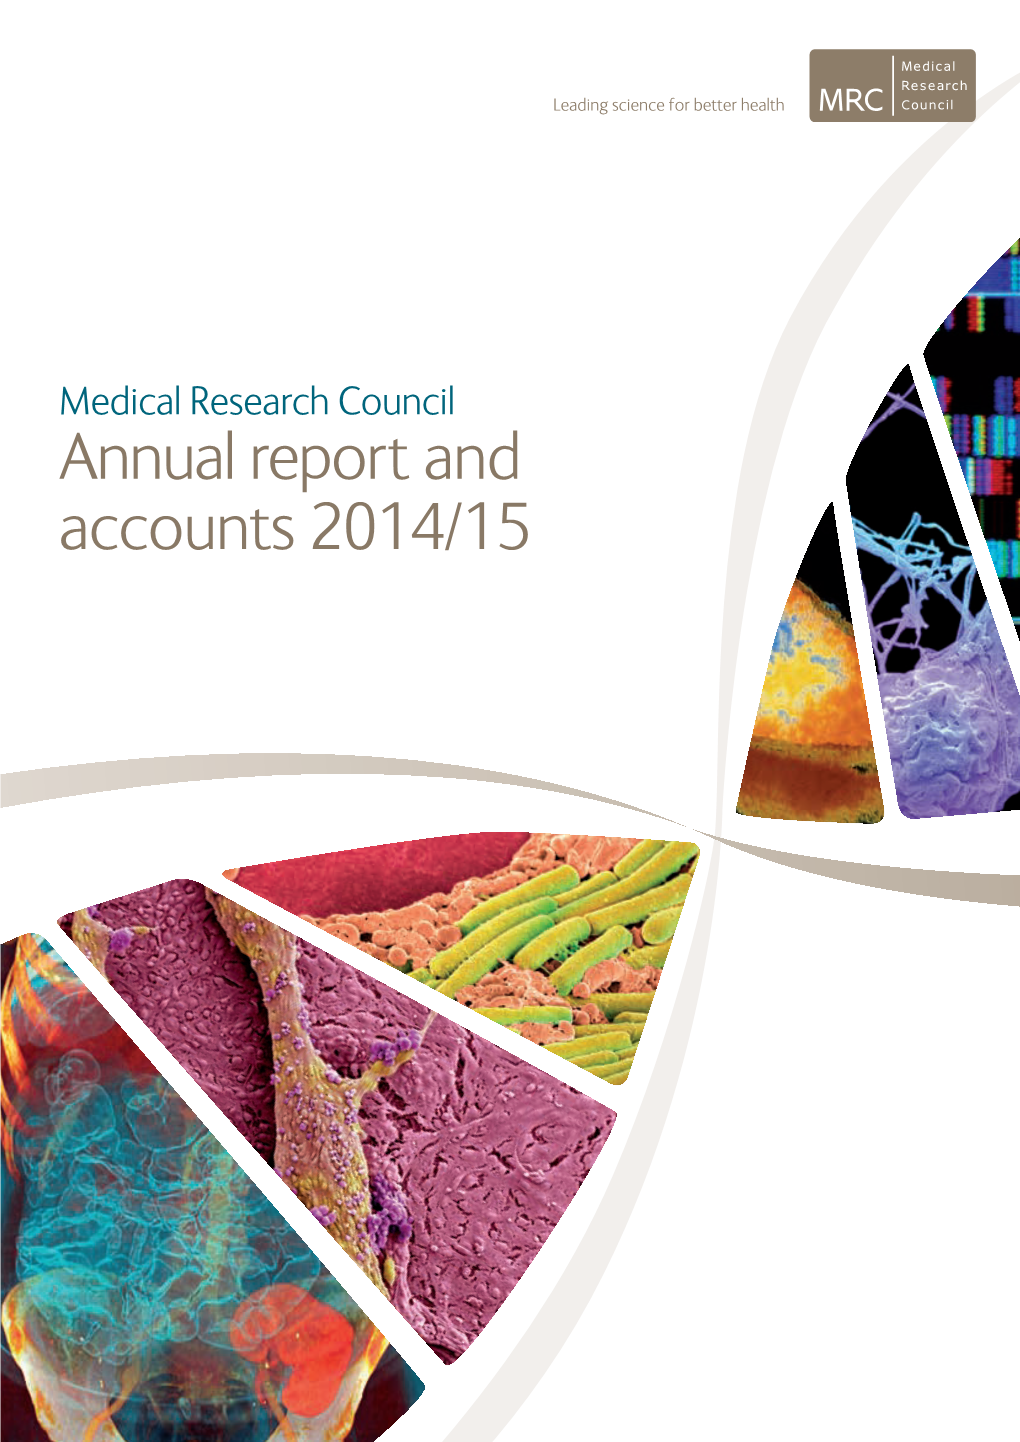 Medical Research Council Annual Report and Accounts 2014/2015